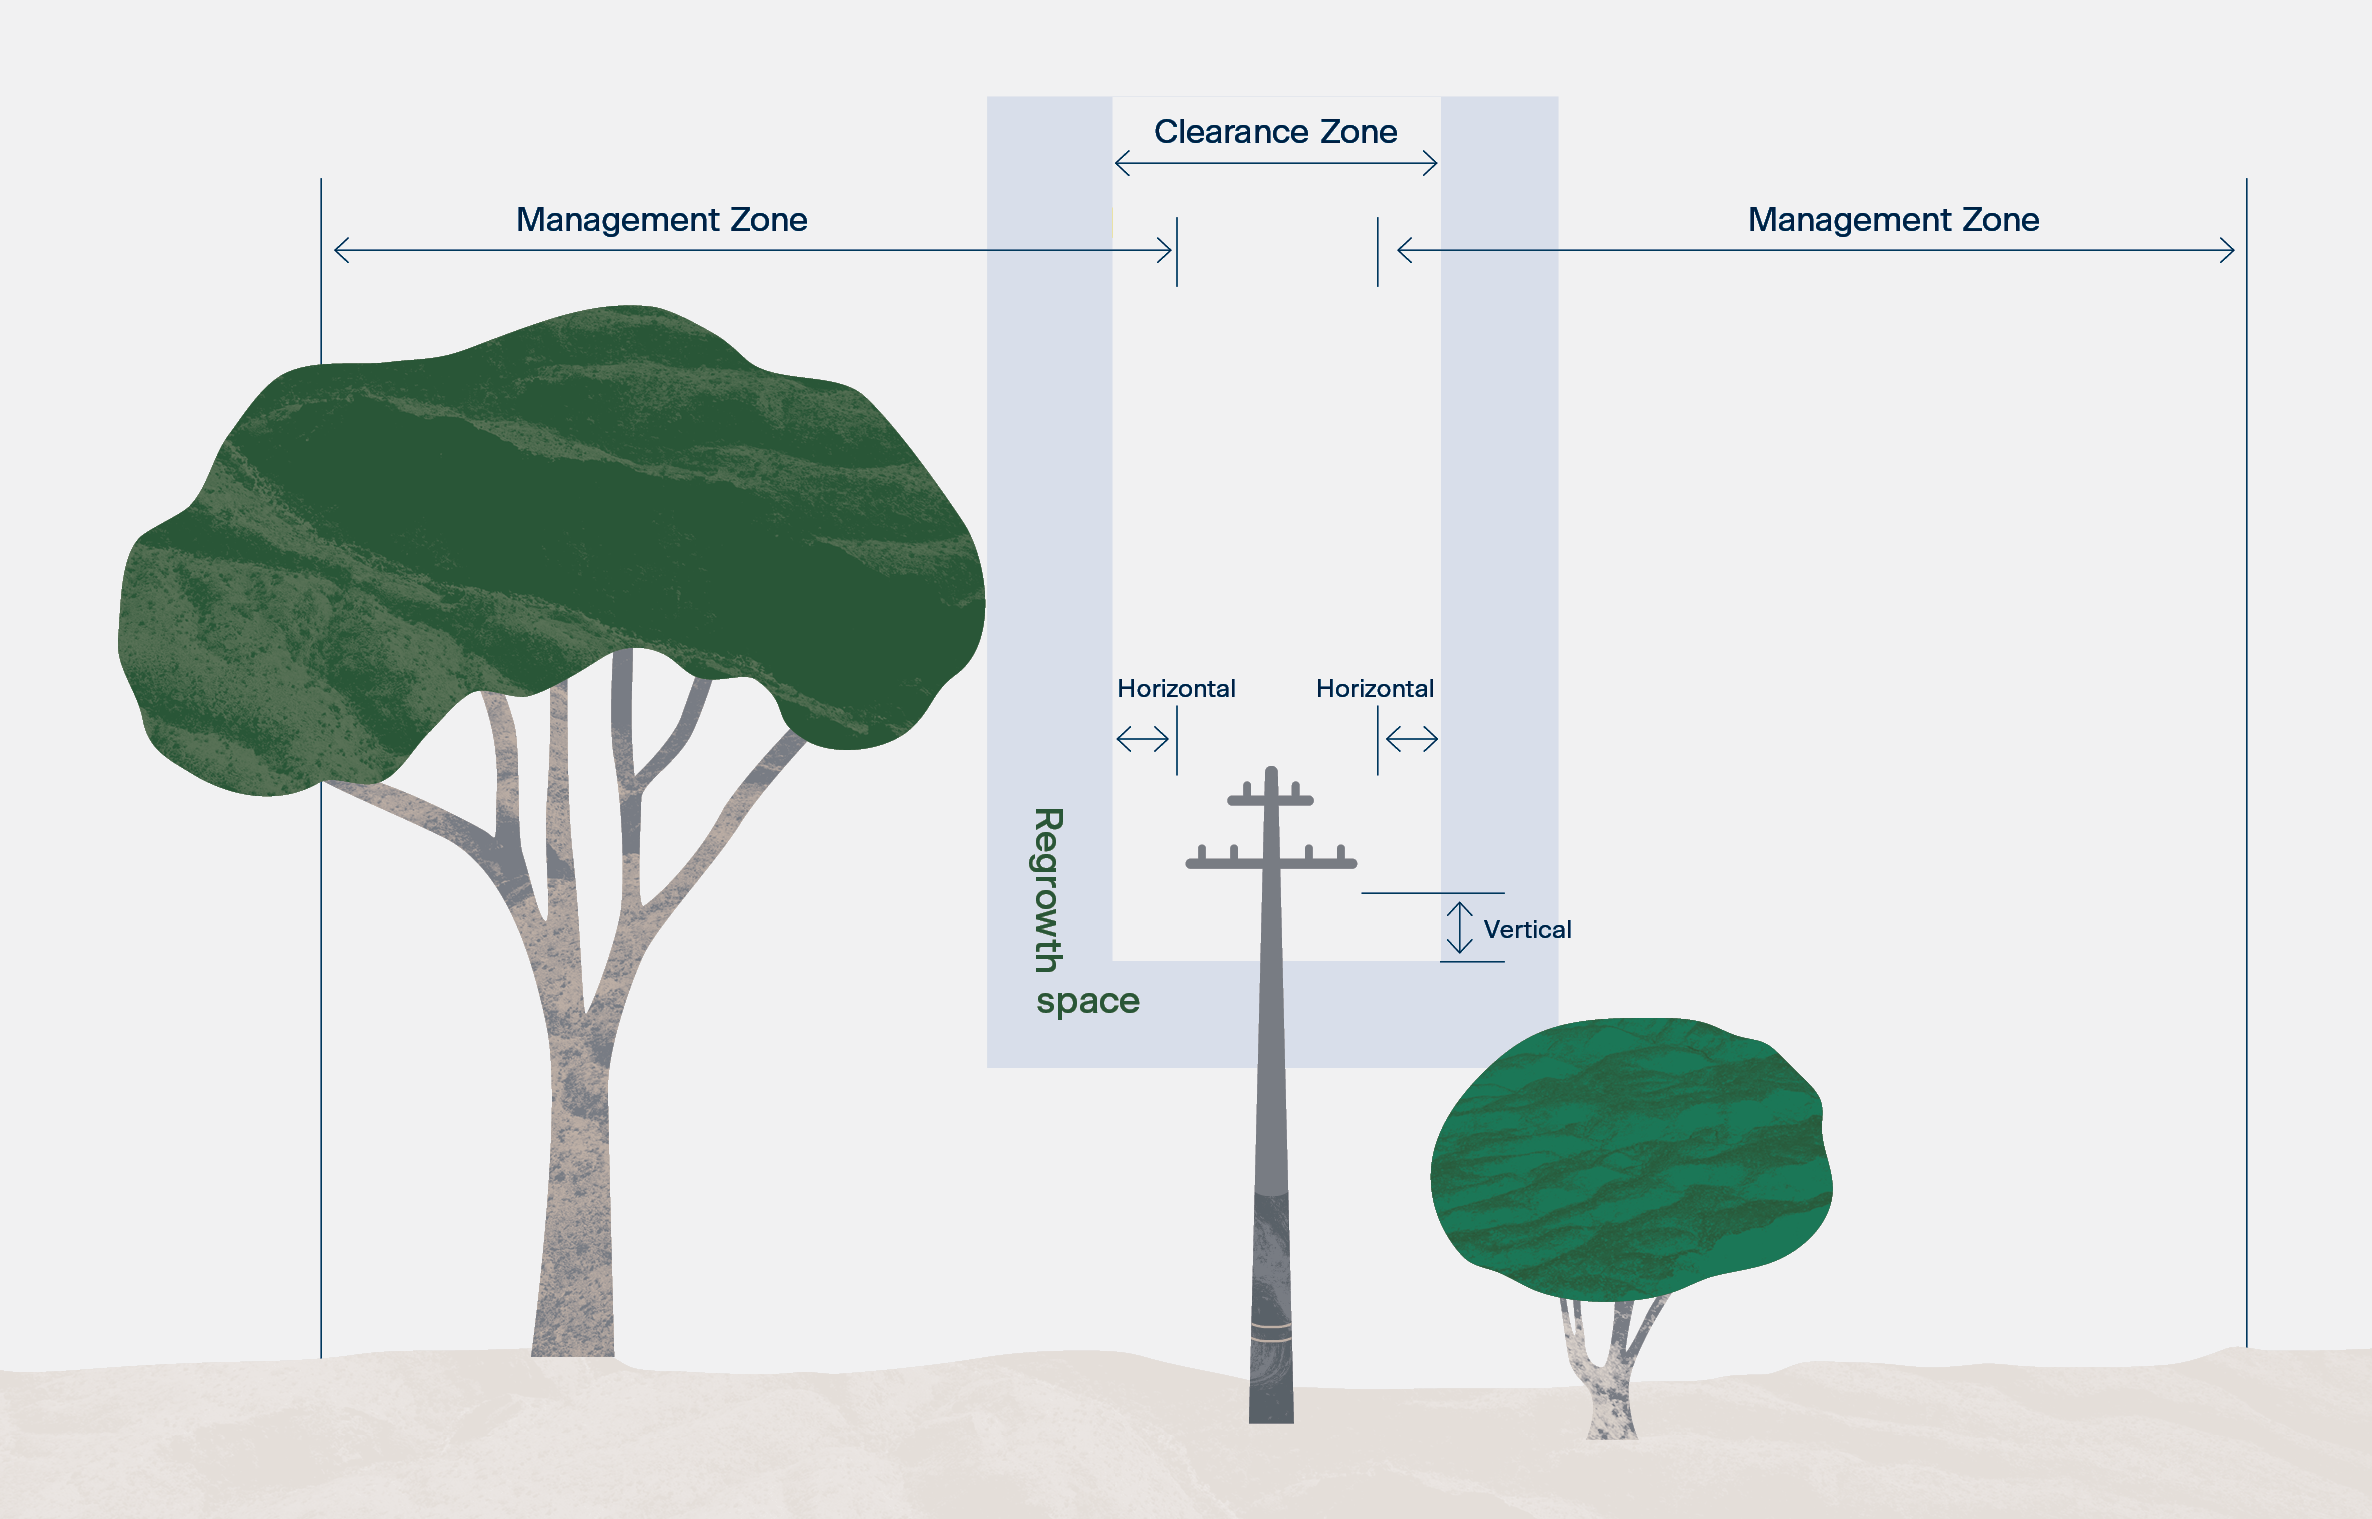 Tree clearance zone illustration 2.png